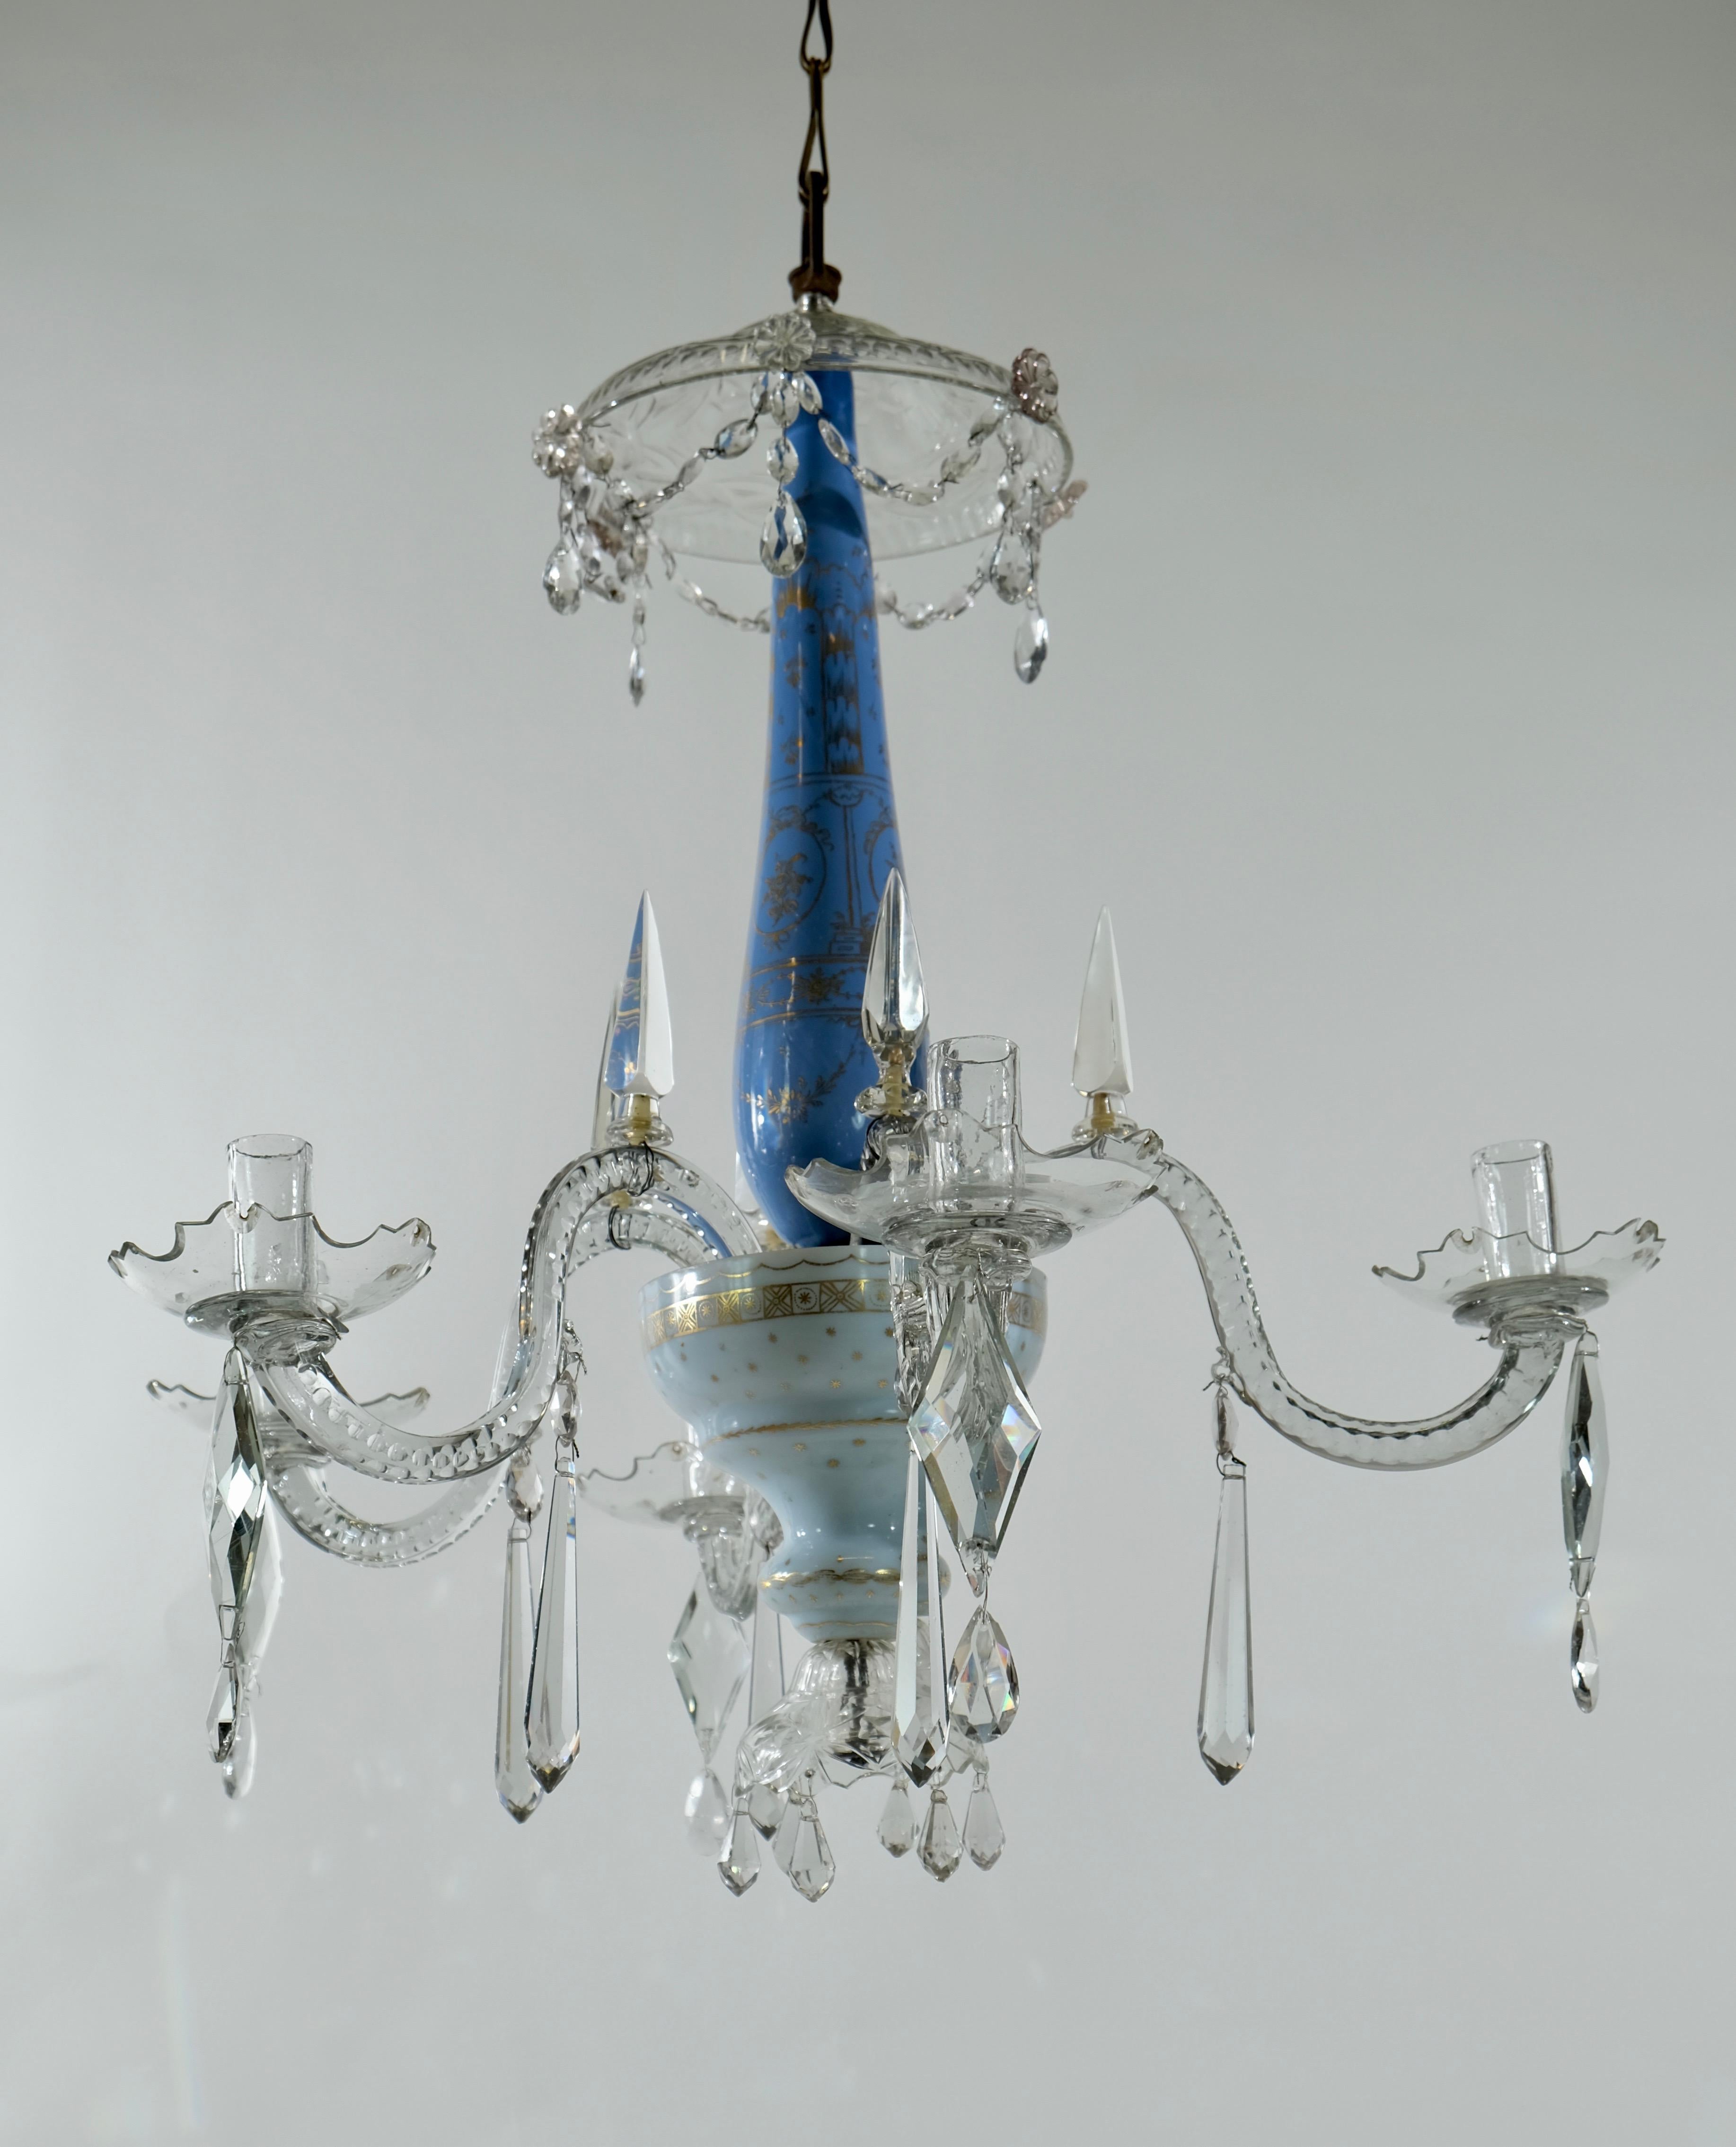 A rare Russian chandelier made in the late 18th c. The turquoise central blown glass 